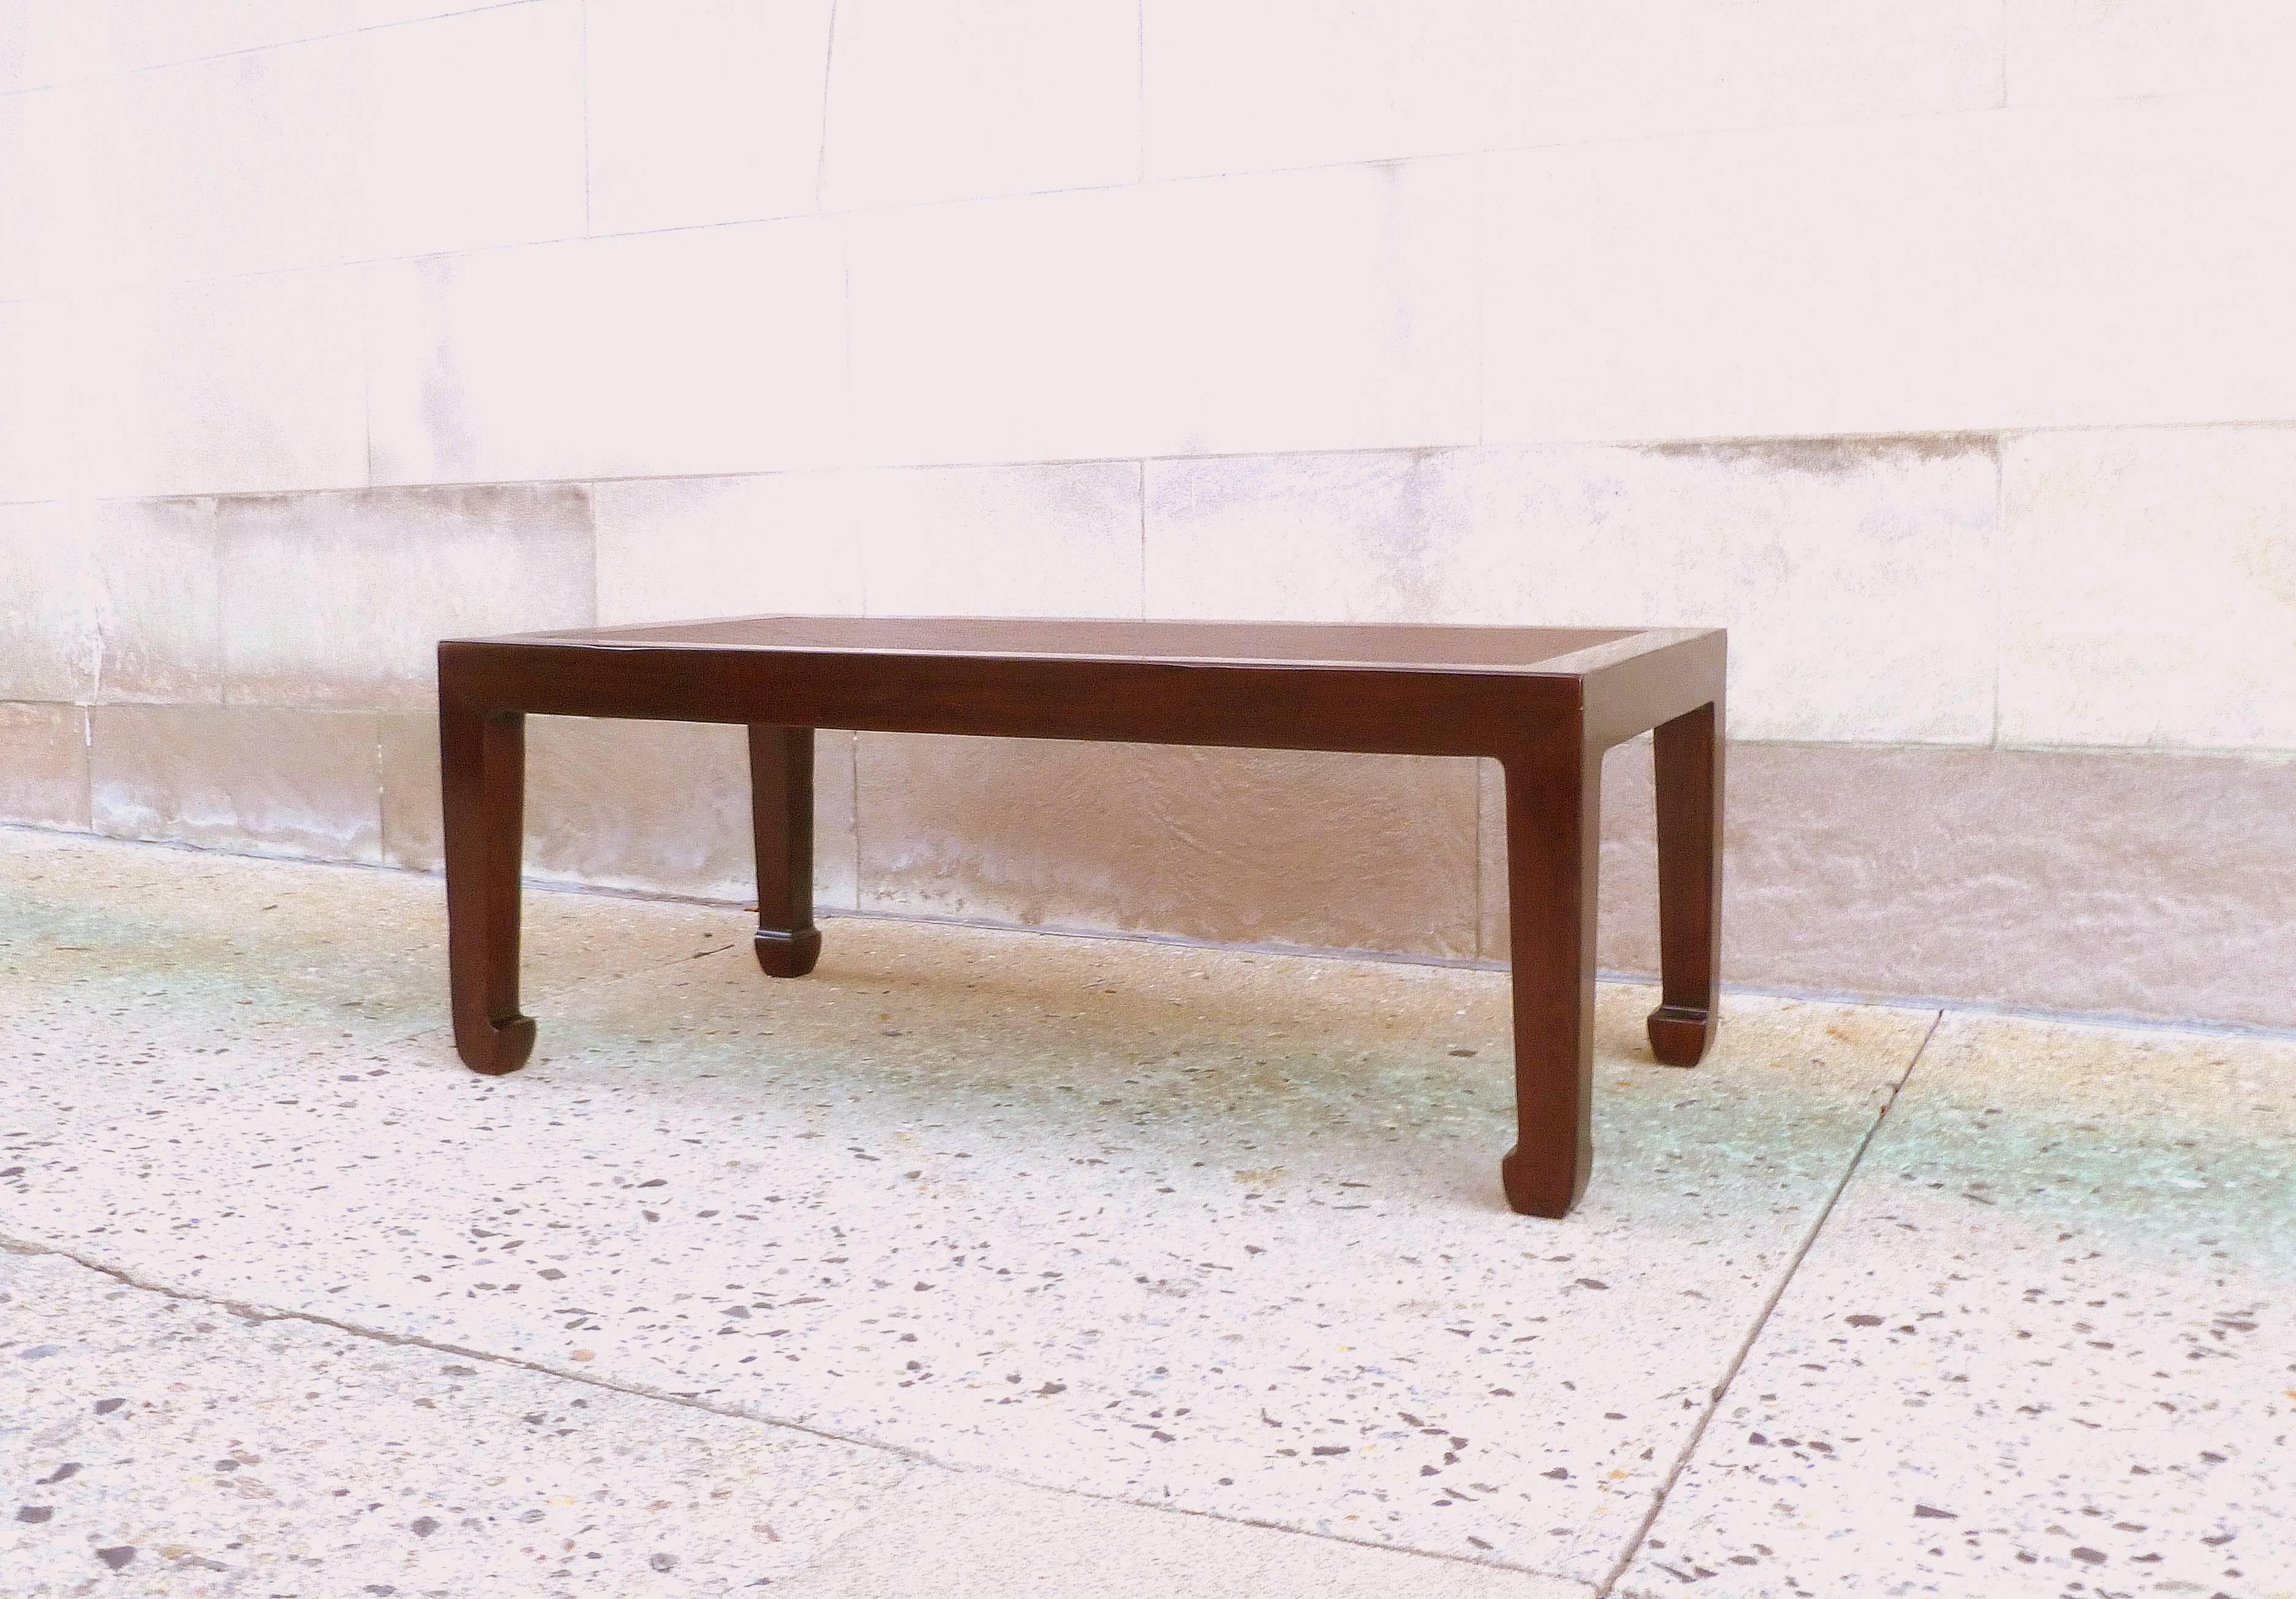 Chinese Elegant Rectangular Low Table with Cane Top